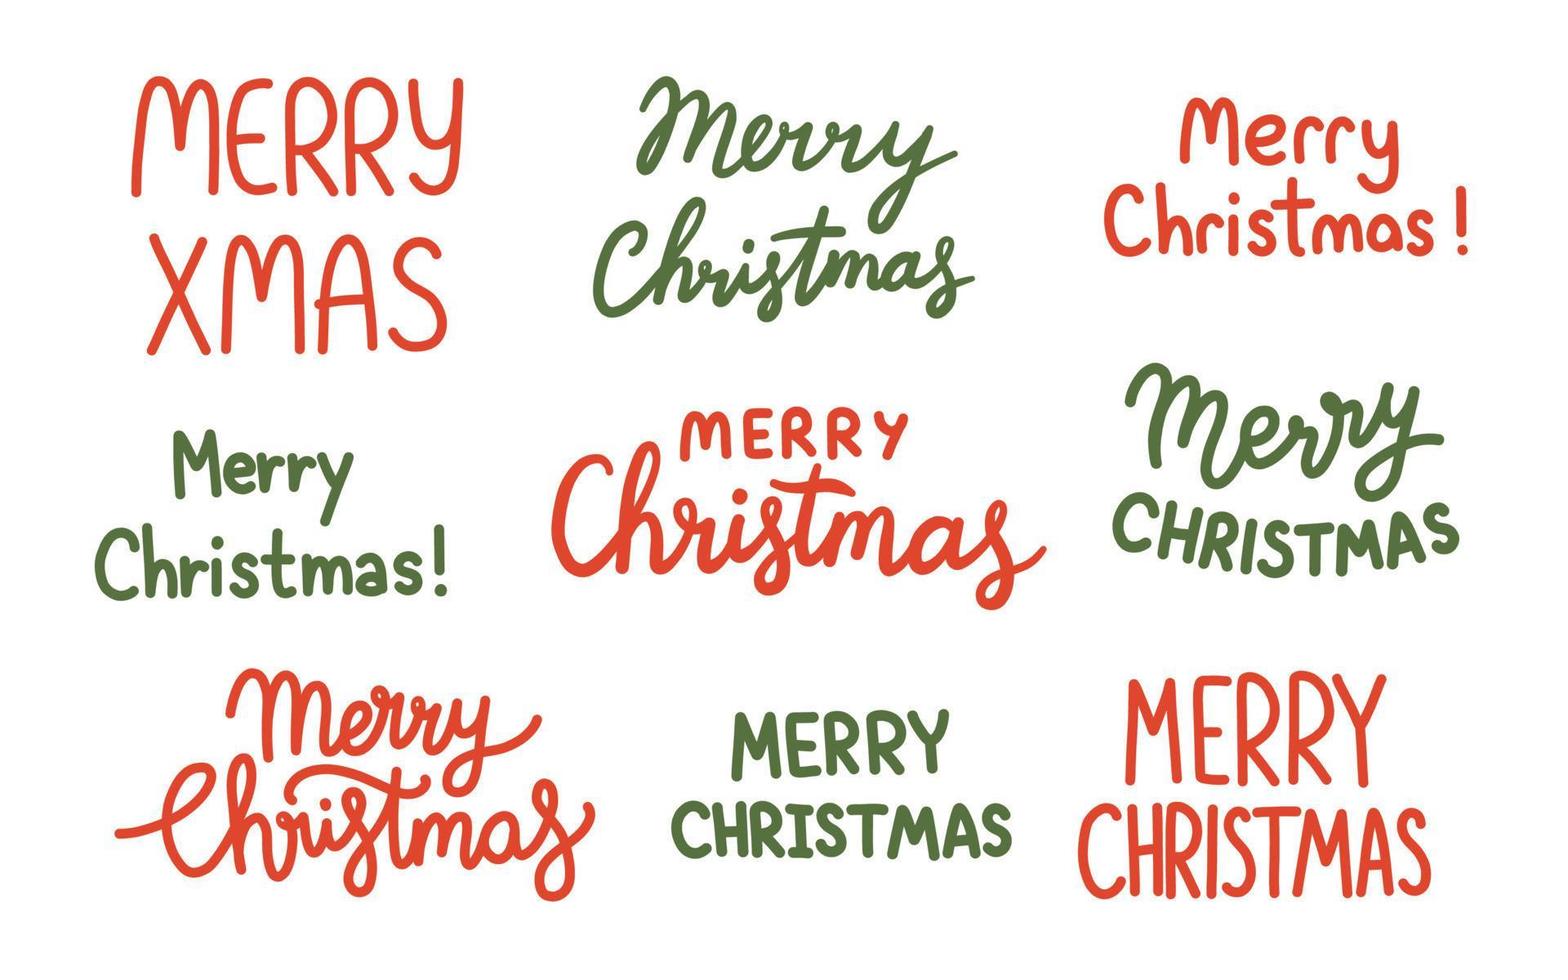 Merry Christmas lettering set red and green isolated on white vector illustration